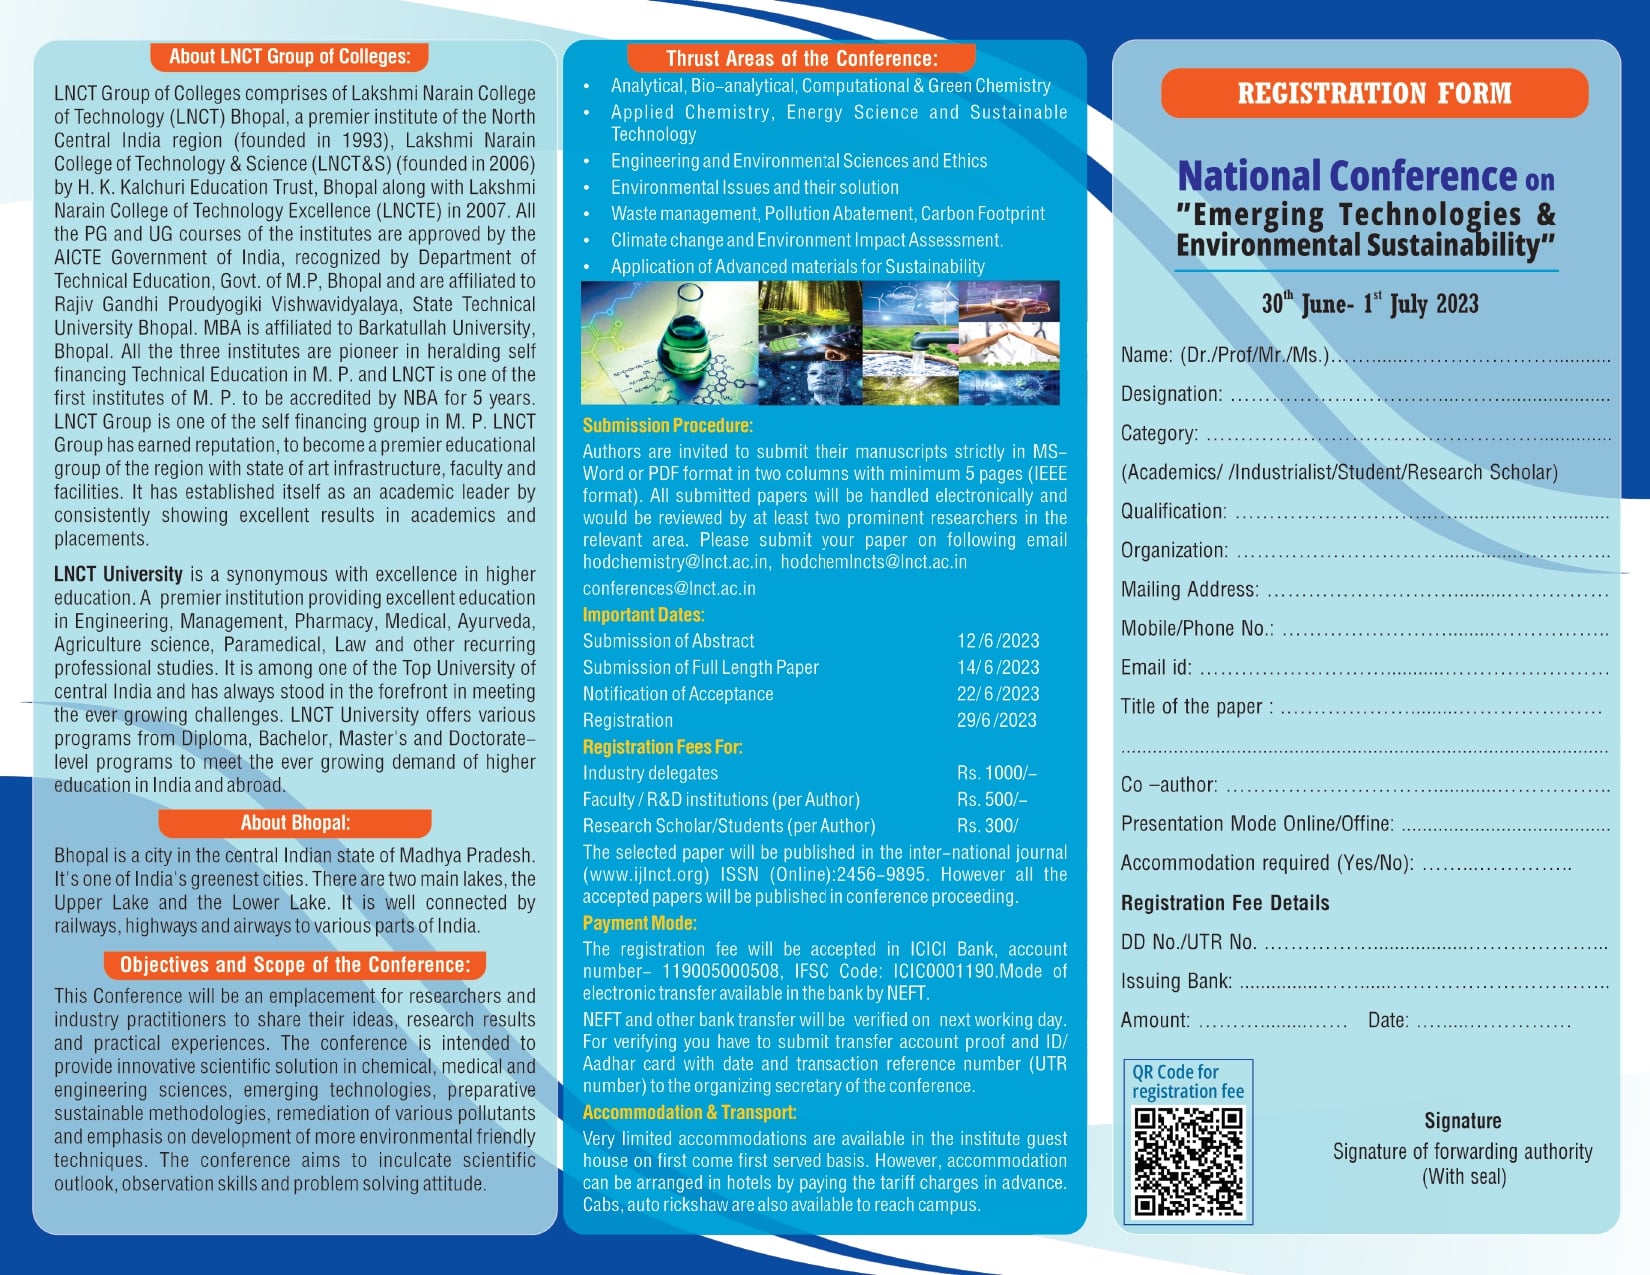 National Conference on Emerging Technologies & Environmental Sustainability 1